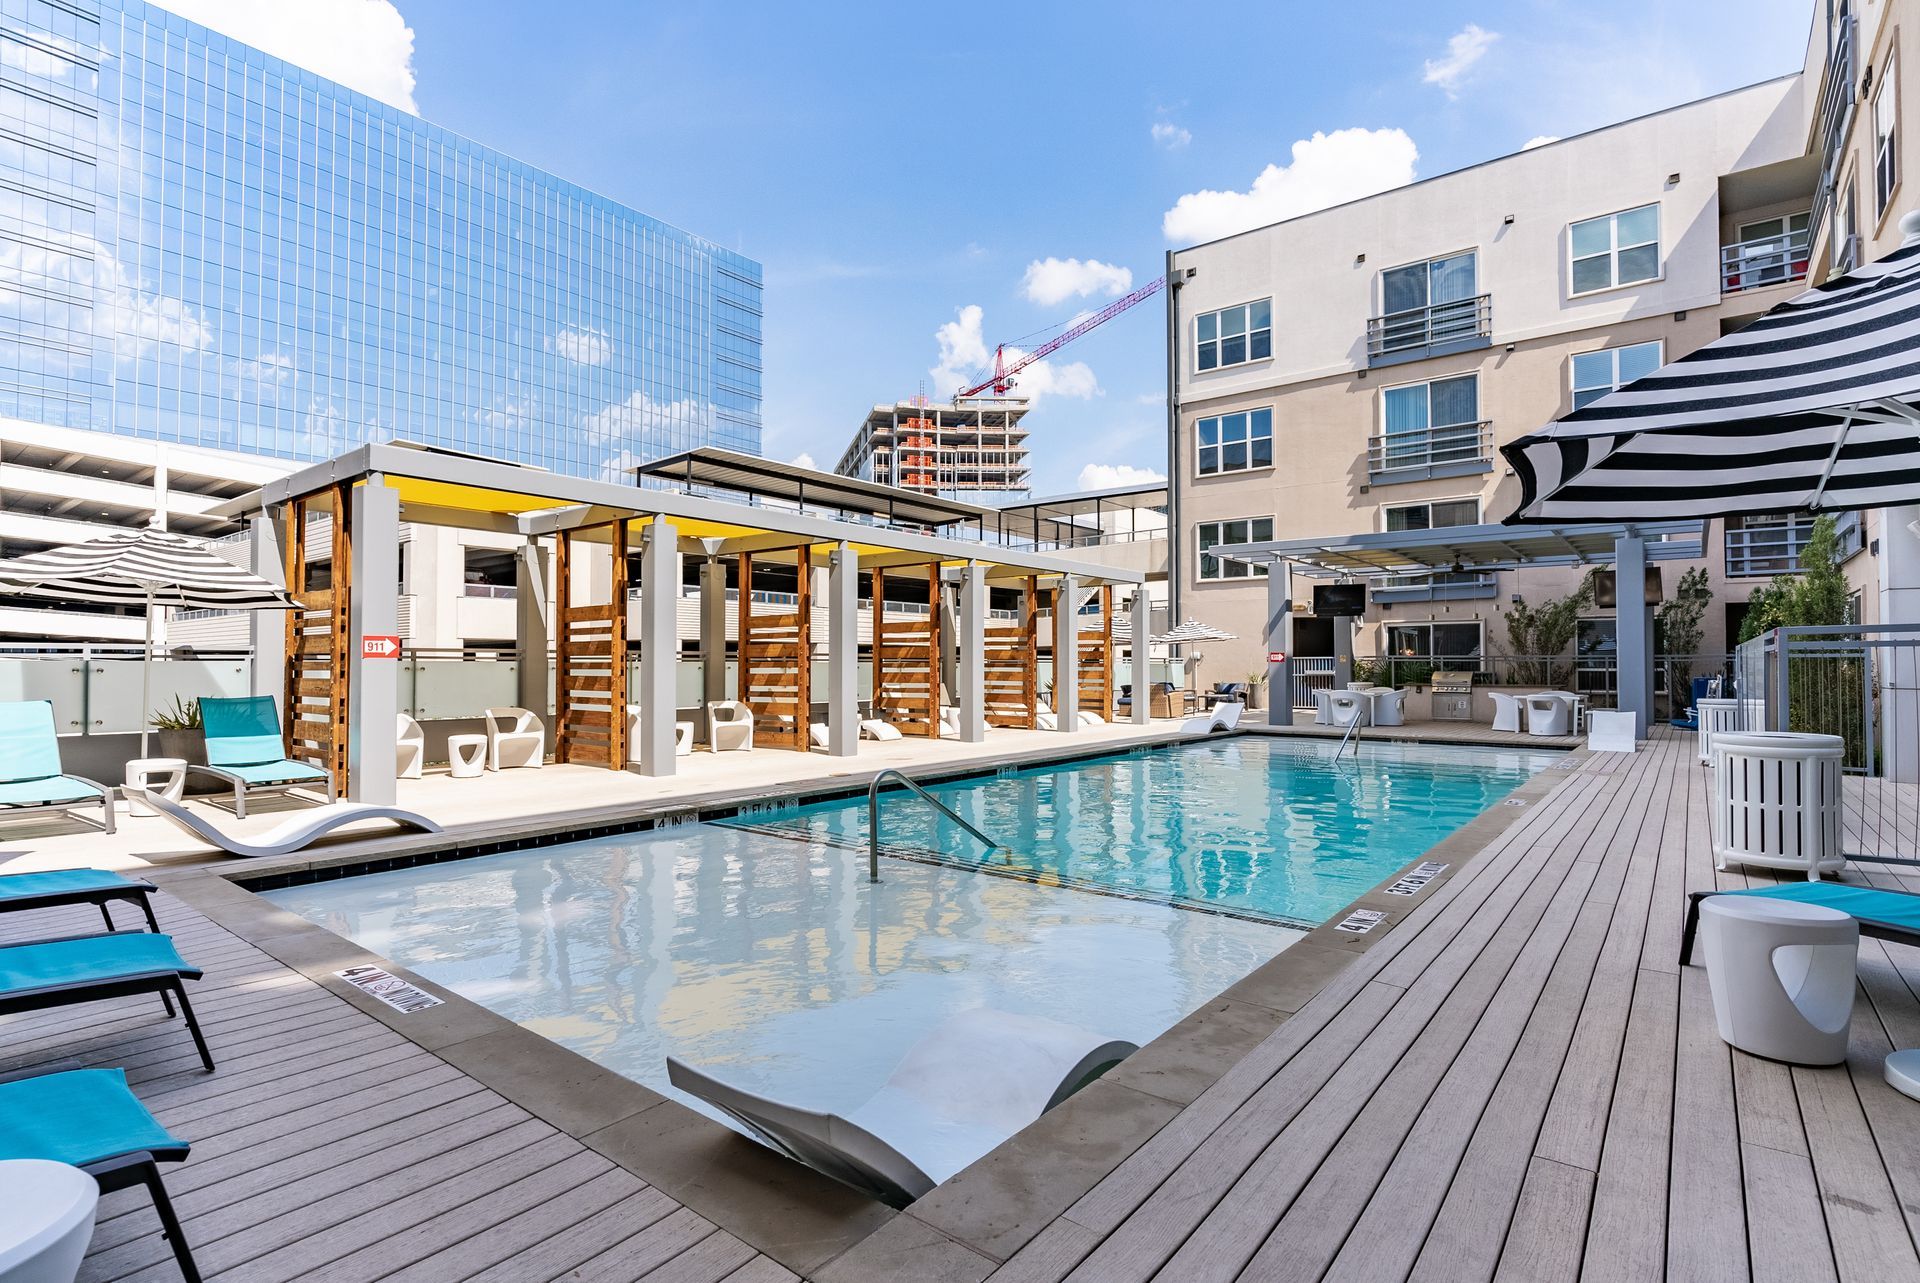 The Standard at Domain Northside resort-style outdoor pool in Austin, TX.